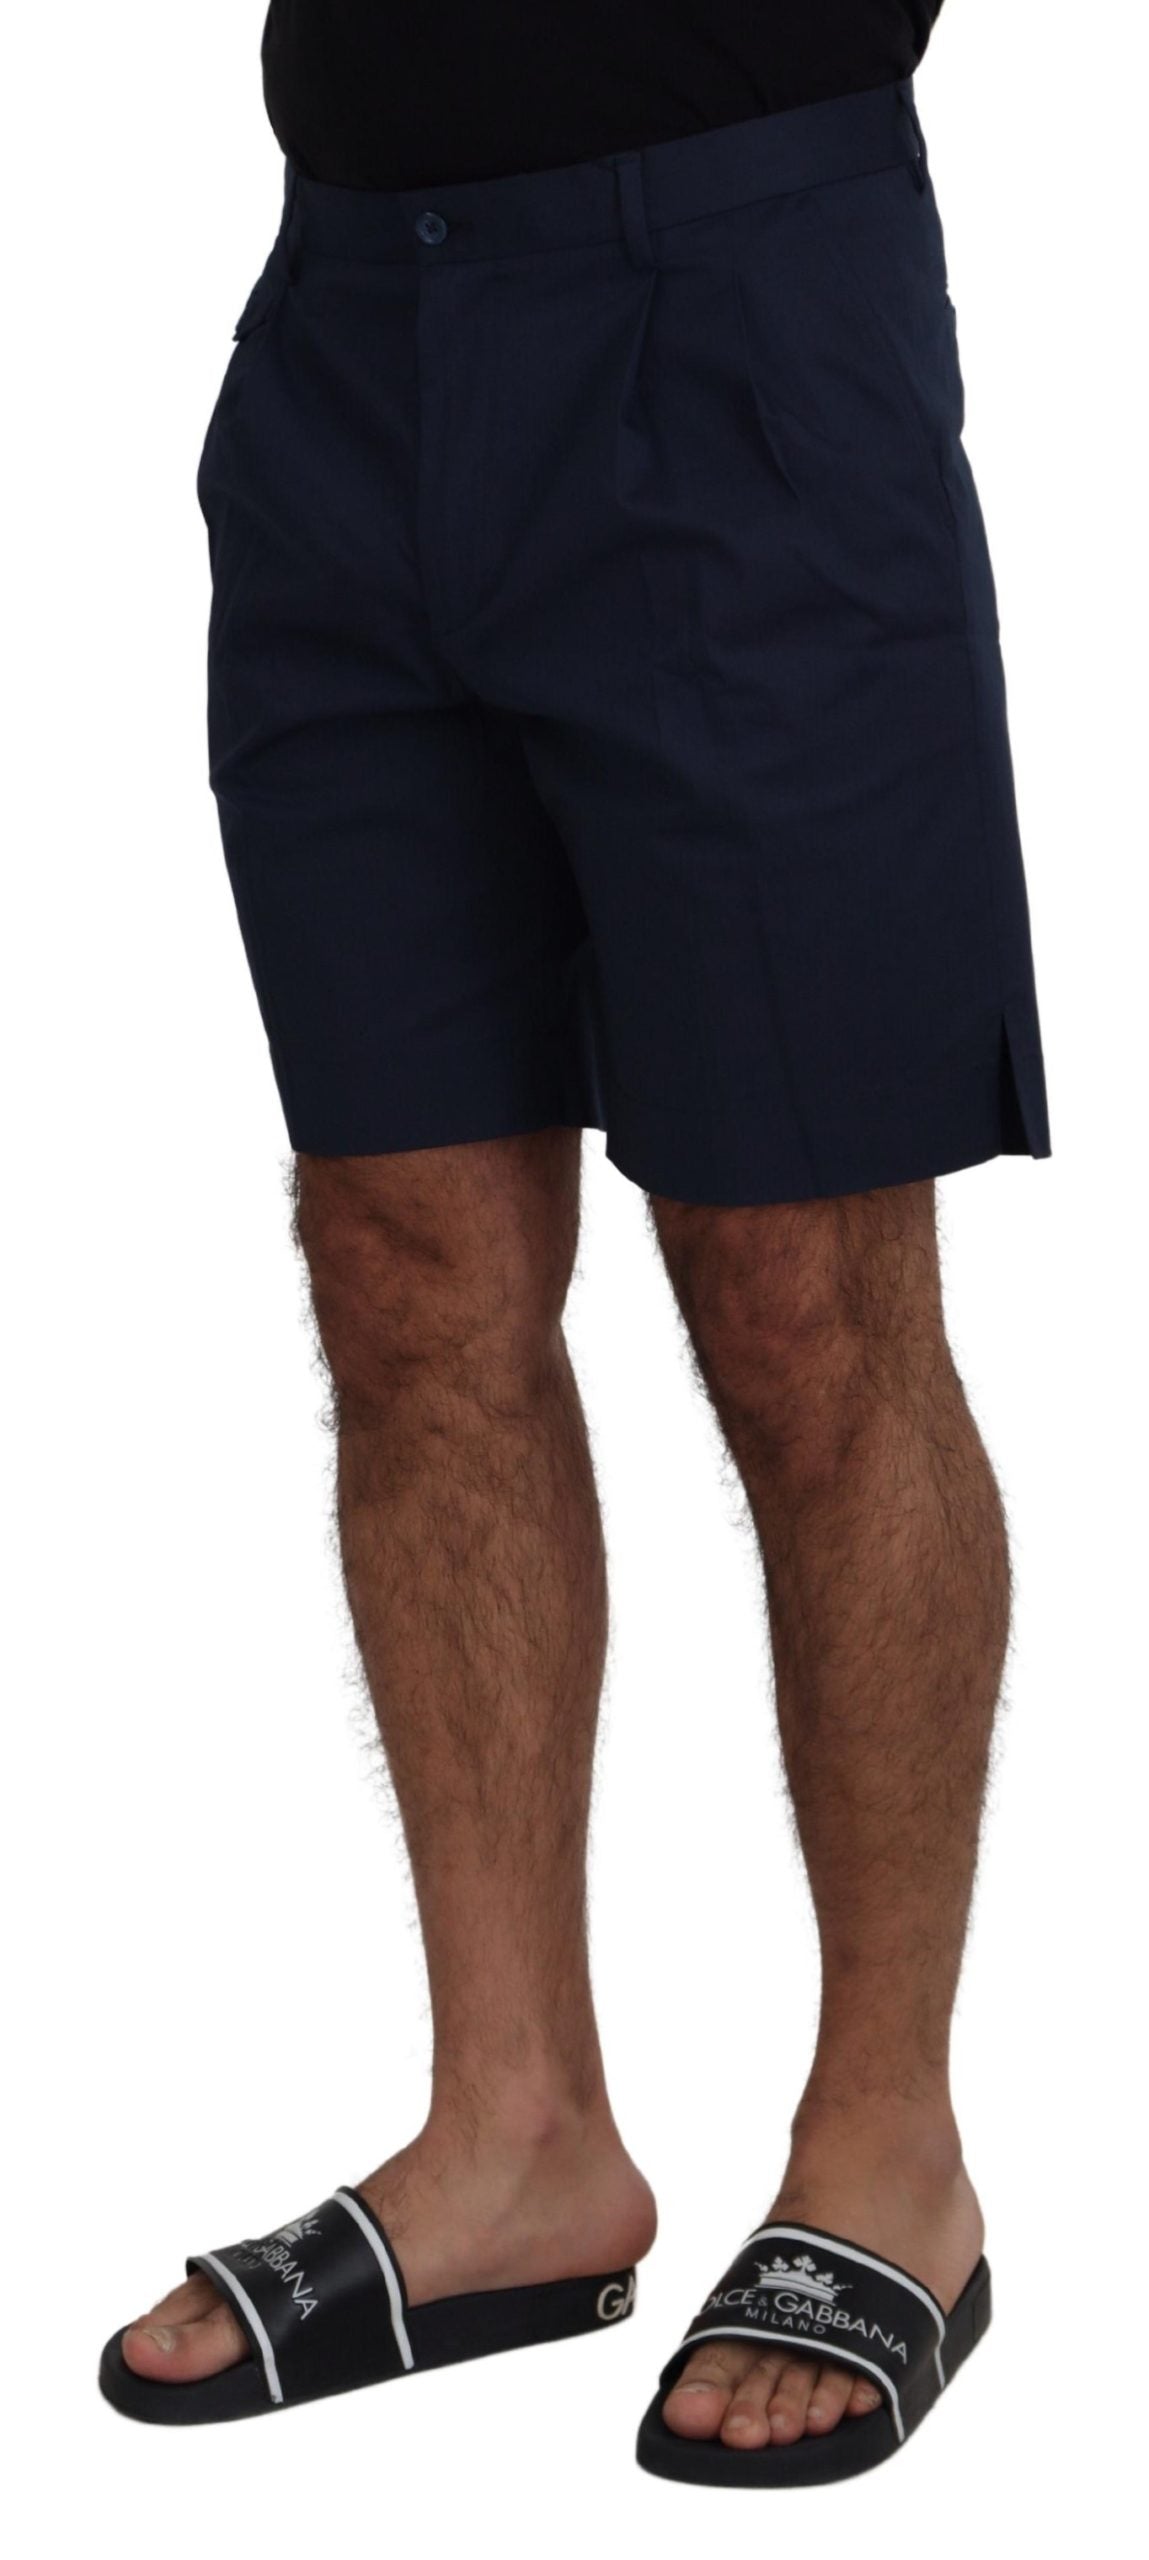 Dolce & Gabbana Men's Blue Chinos Cotton Stretch Casual Shorts - Designed by Dolce & Gabbana Available to Buy at a Discounted Price on Moon Behind The Hill Online Designer Discount Store